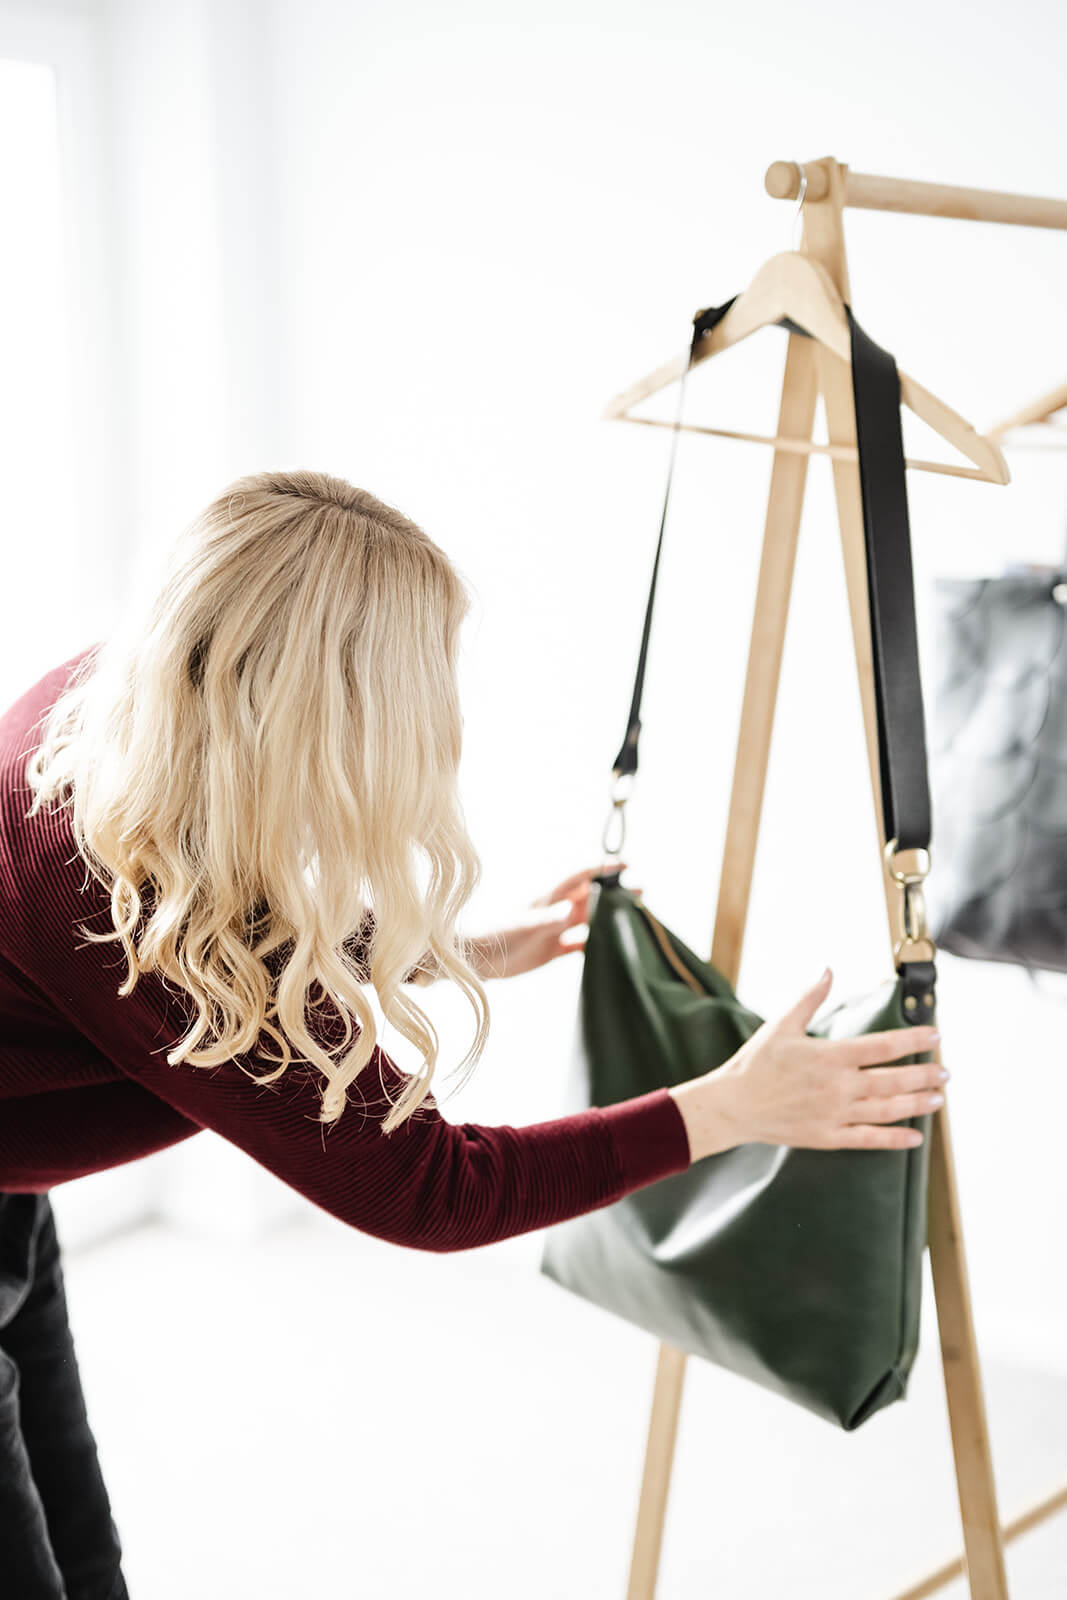 Woman arranging green leather bag on timber coat hanger. She has wavy blonde hair and a maroon jumper. The bag is the Ella Jackson Leather Carryall in Moss Green